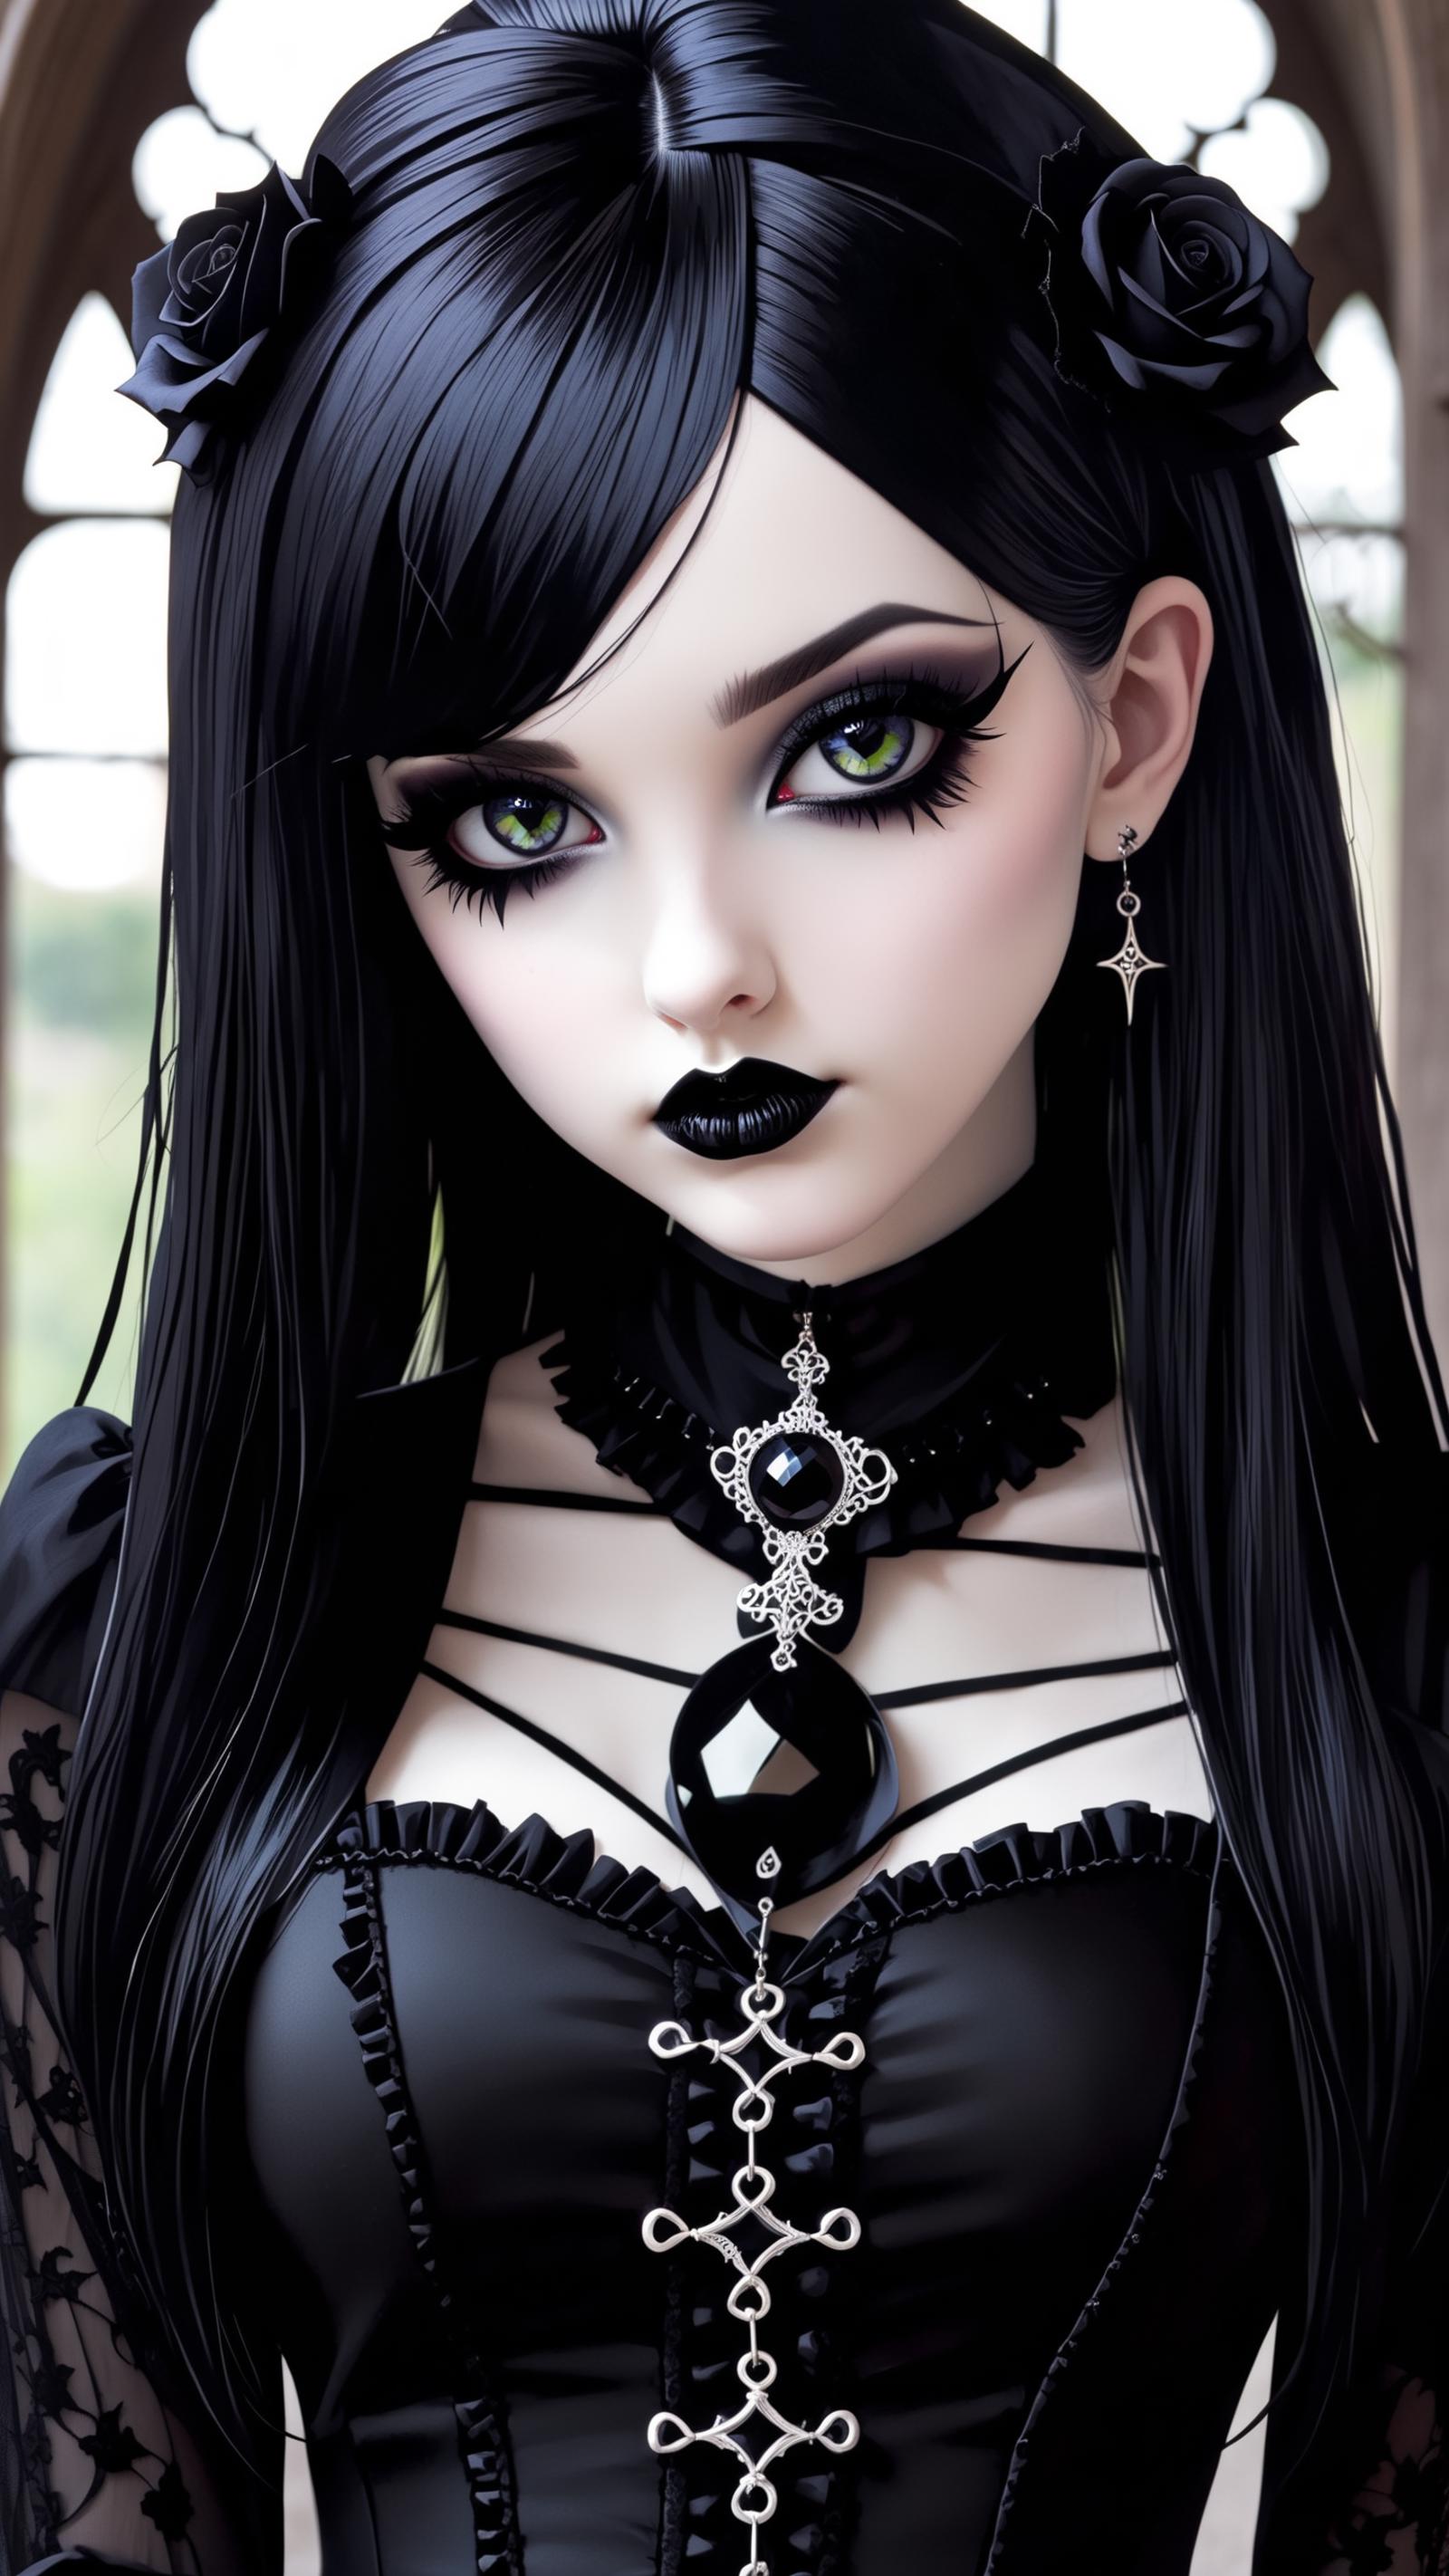 A woman with black hair and black lipstick wearing a black dress and a necklace with a cross pendant.